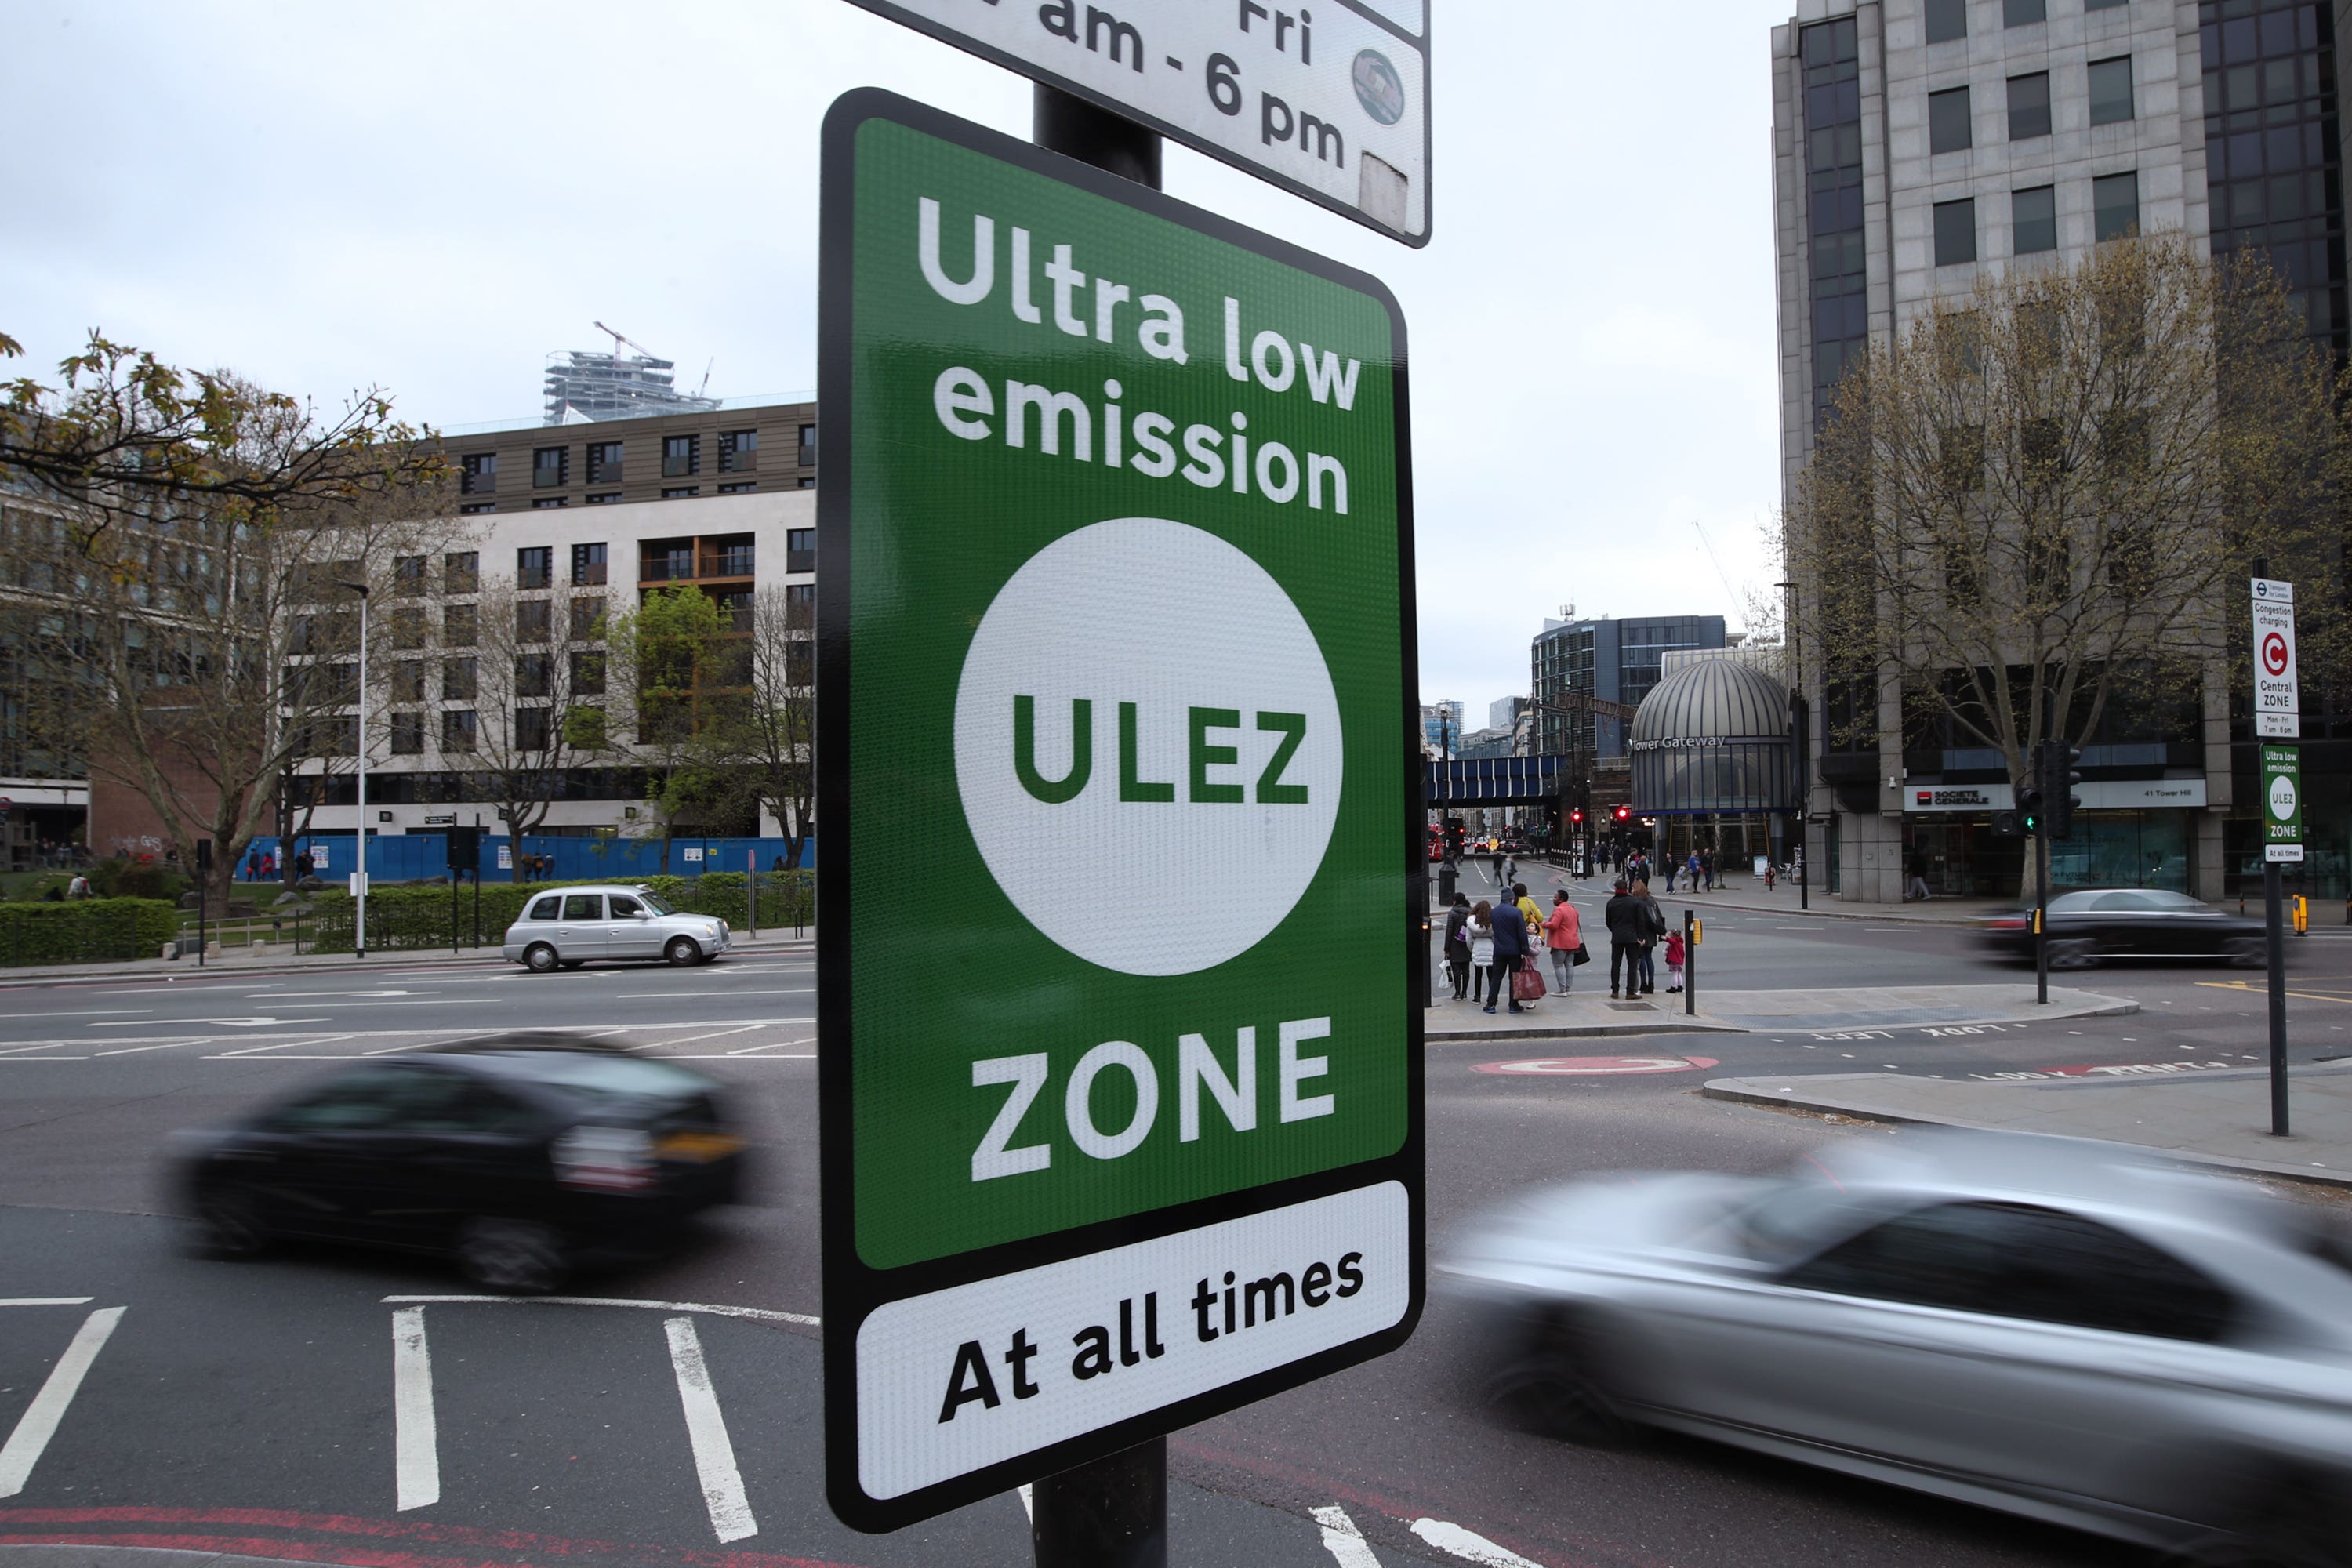 Thousands of tradespeople face the prospect of huge bills following Sadiq Khan’s expansion of London’s ultra low emission zone because of a lack of compliant vans for sale, according to new analysis (Yui Mok/PA)